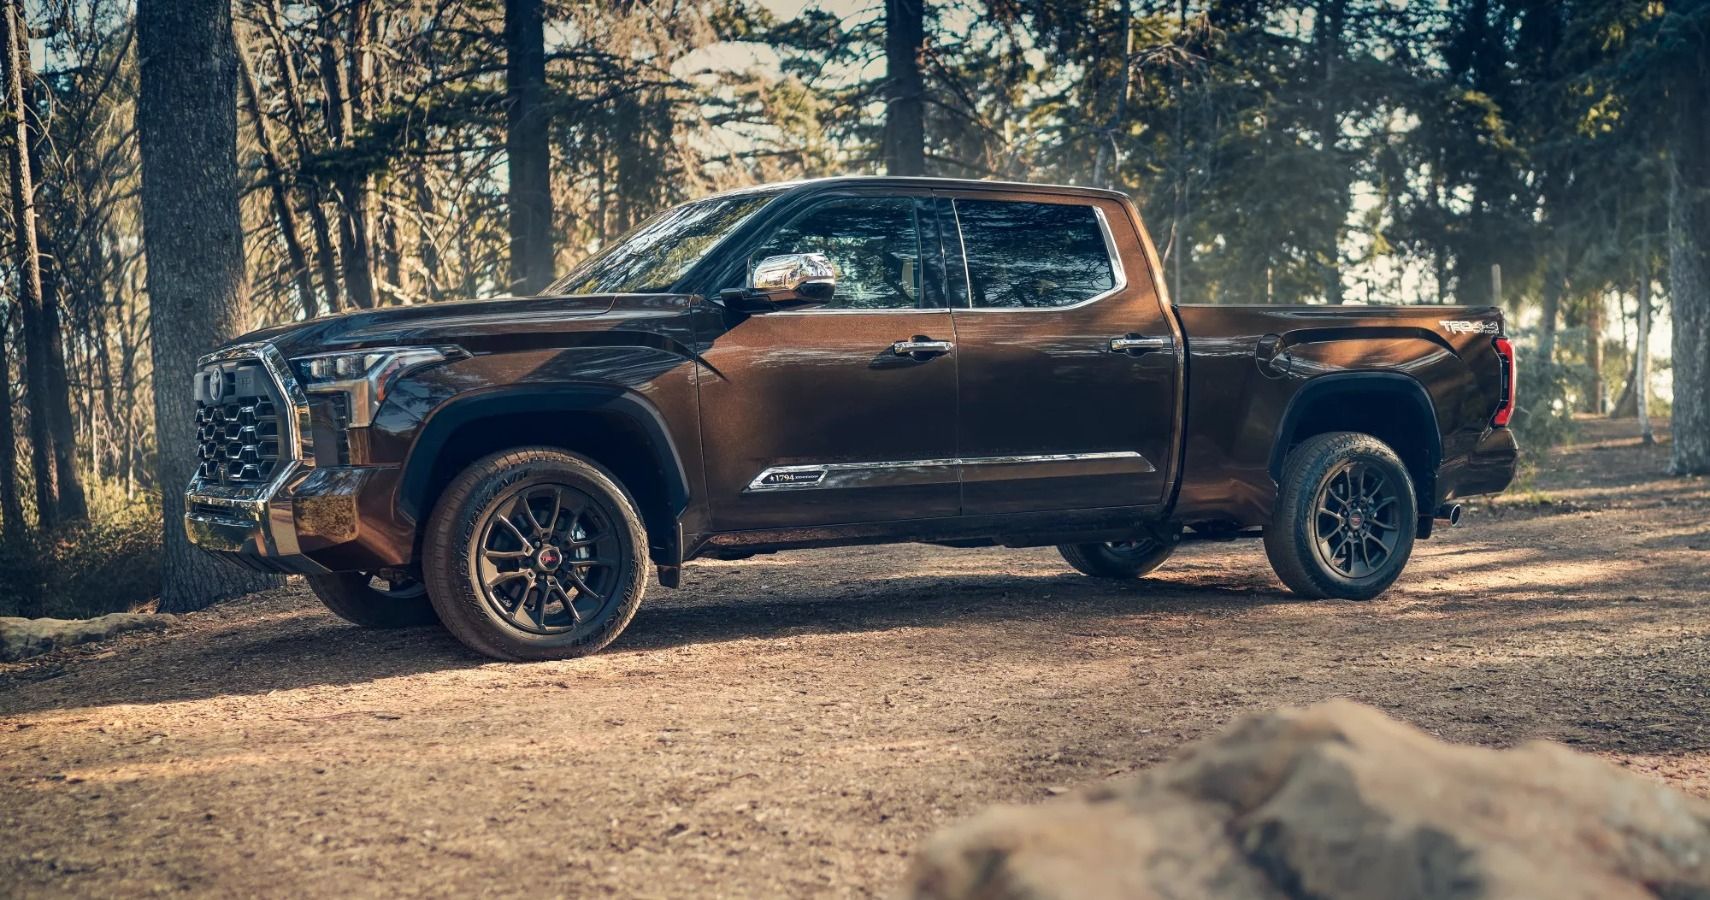 The Toyota Tundra 1794 Edition in the forest. 